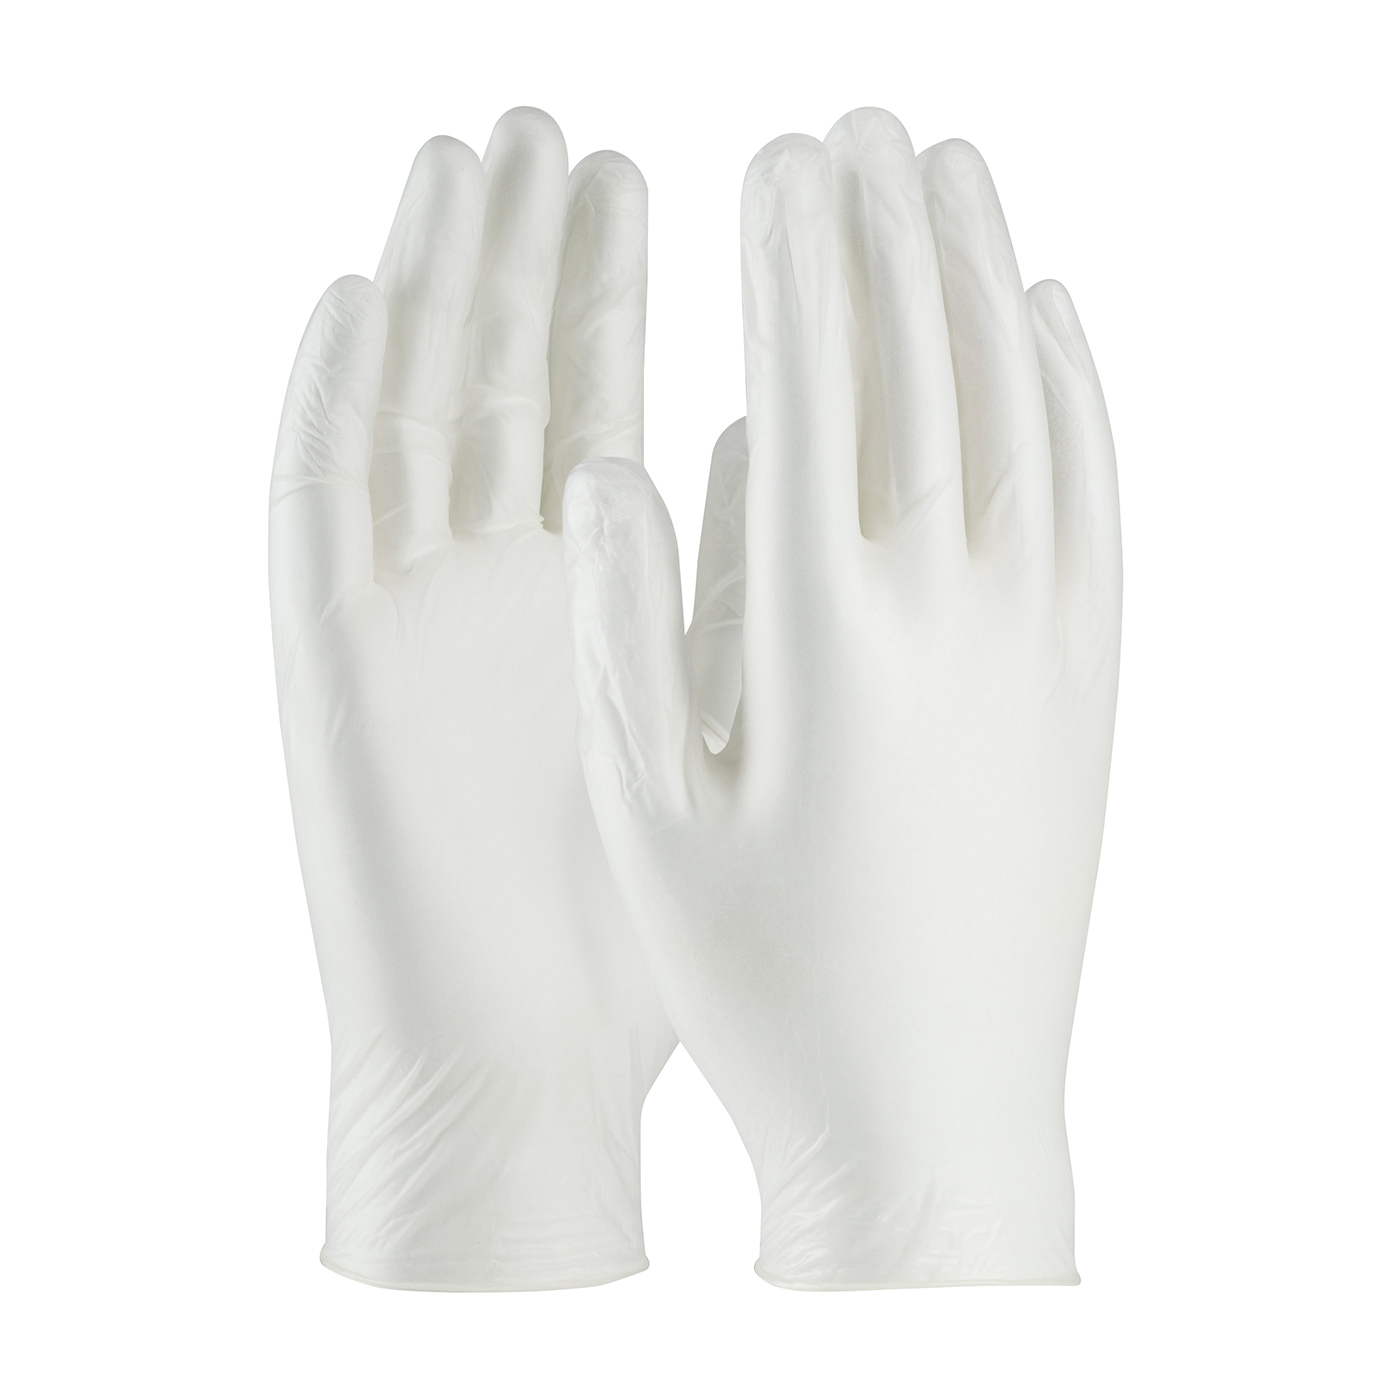 PIP® Ambi-dex® 64-V2000PF/M Disposable Gloves, M, Vinyl, Translucent White, 9.4 in L, Non-Powdered, 4 mil THK, Application Type: Industrial Grade, Ambidextrous Hand